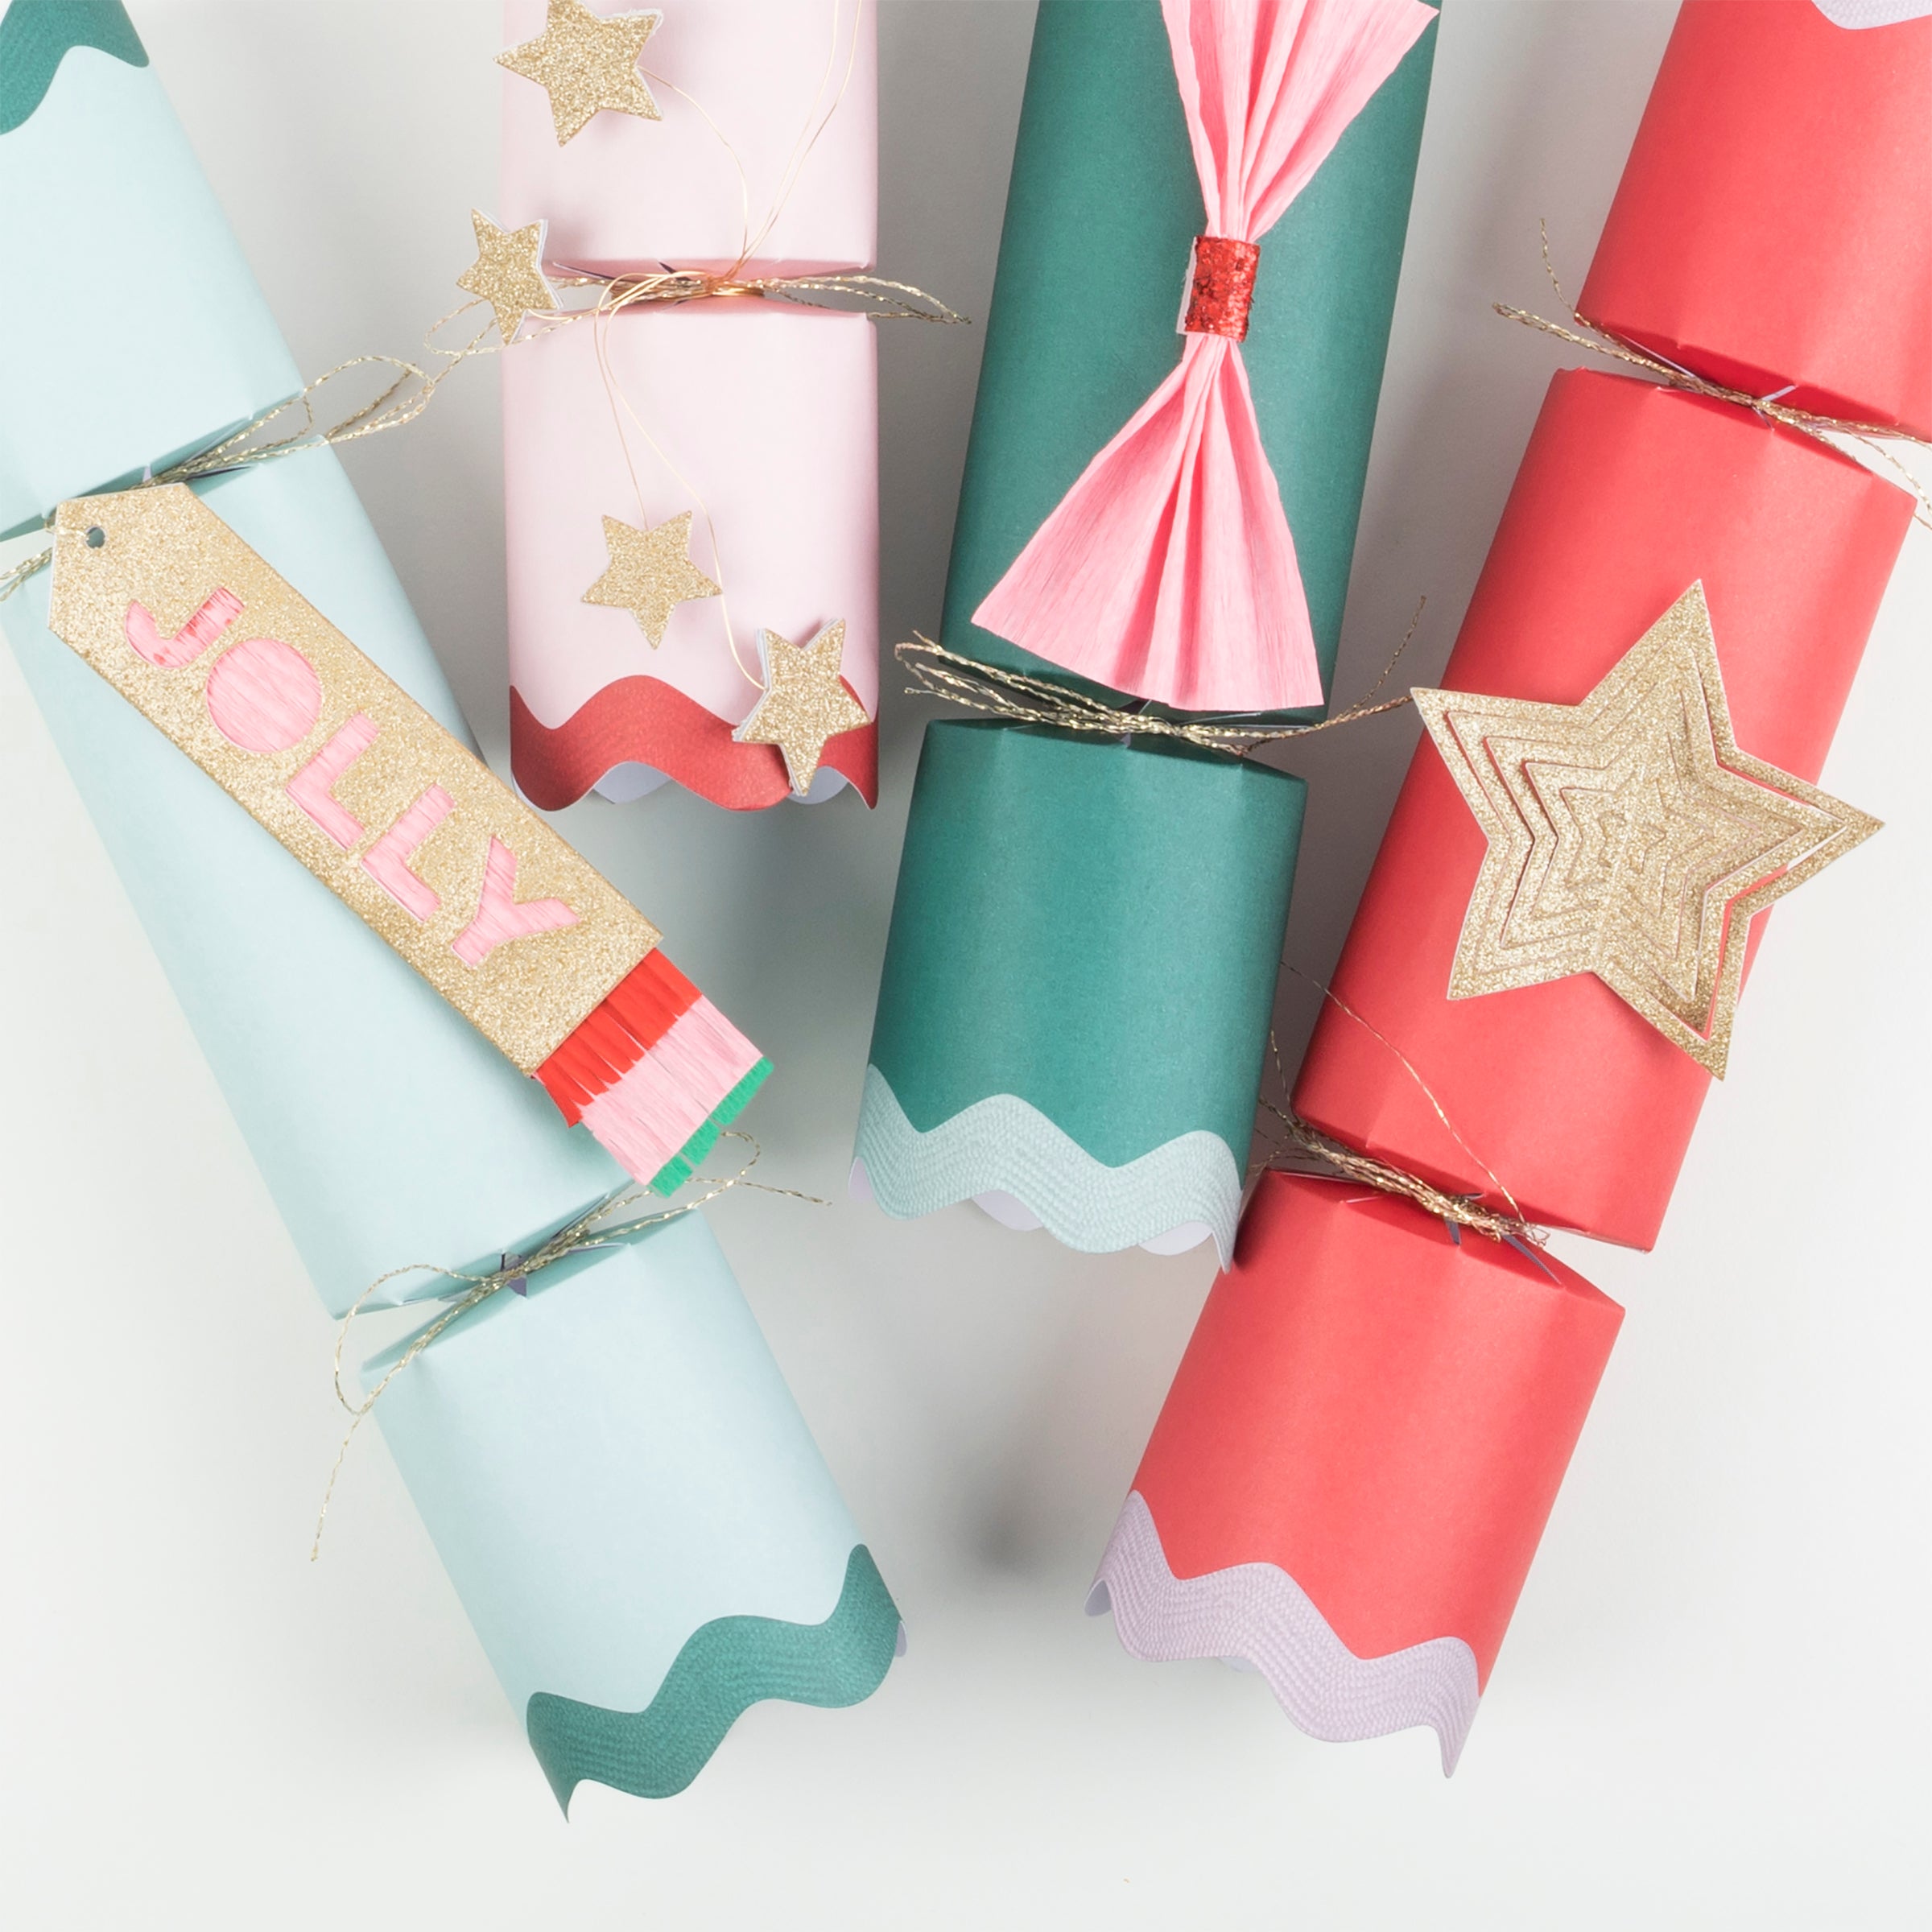 The crackers contain fun erasers for kids, party party hats and jokes.